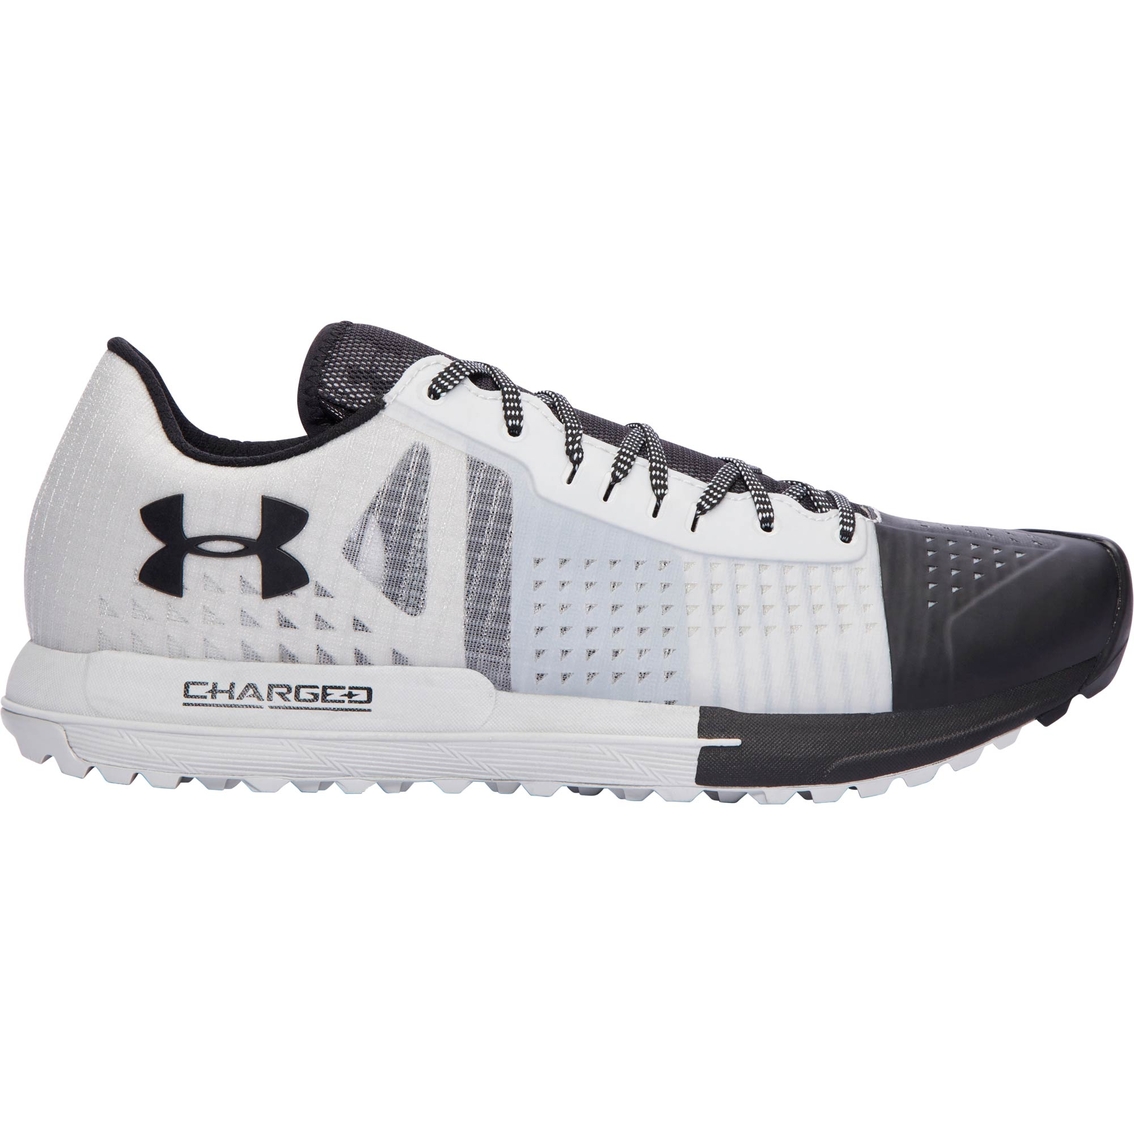 under armour trail running shoes mens